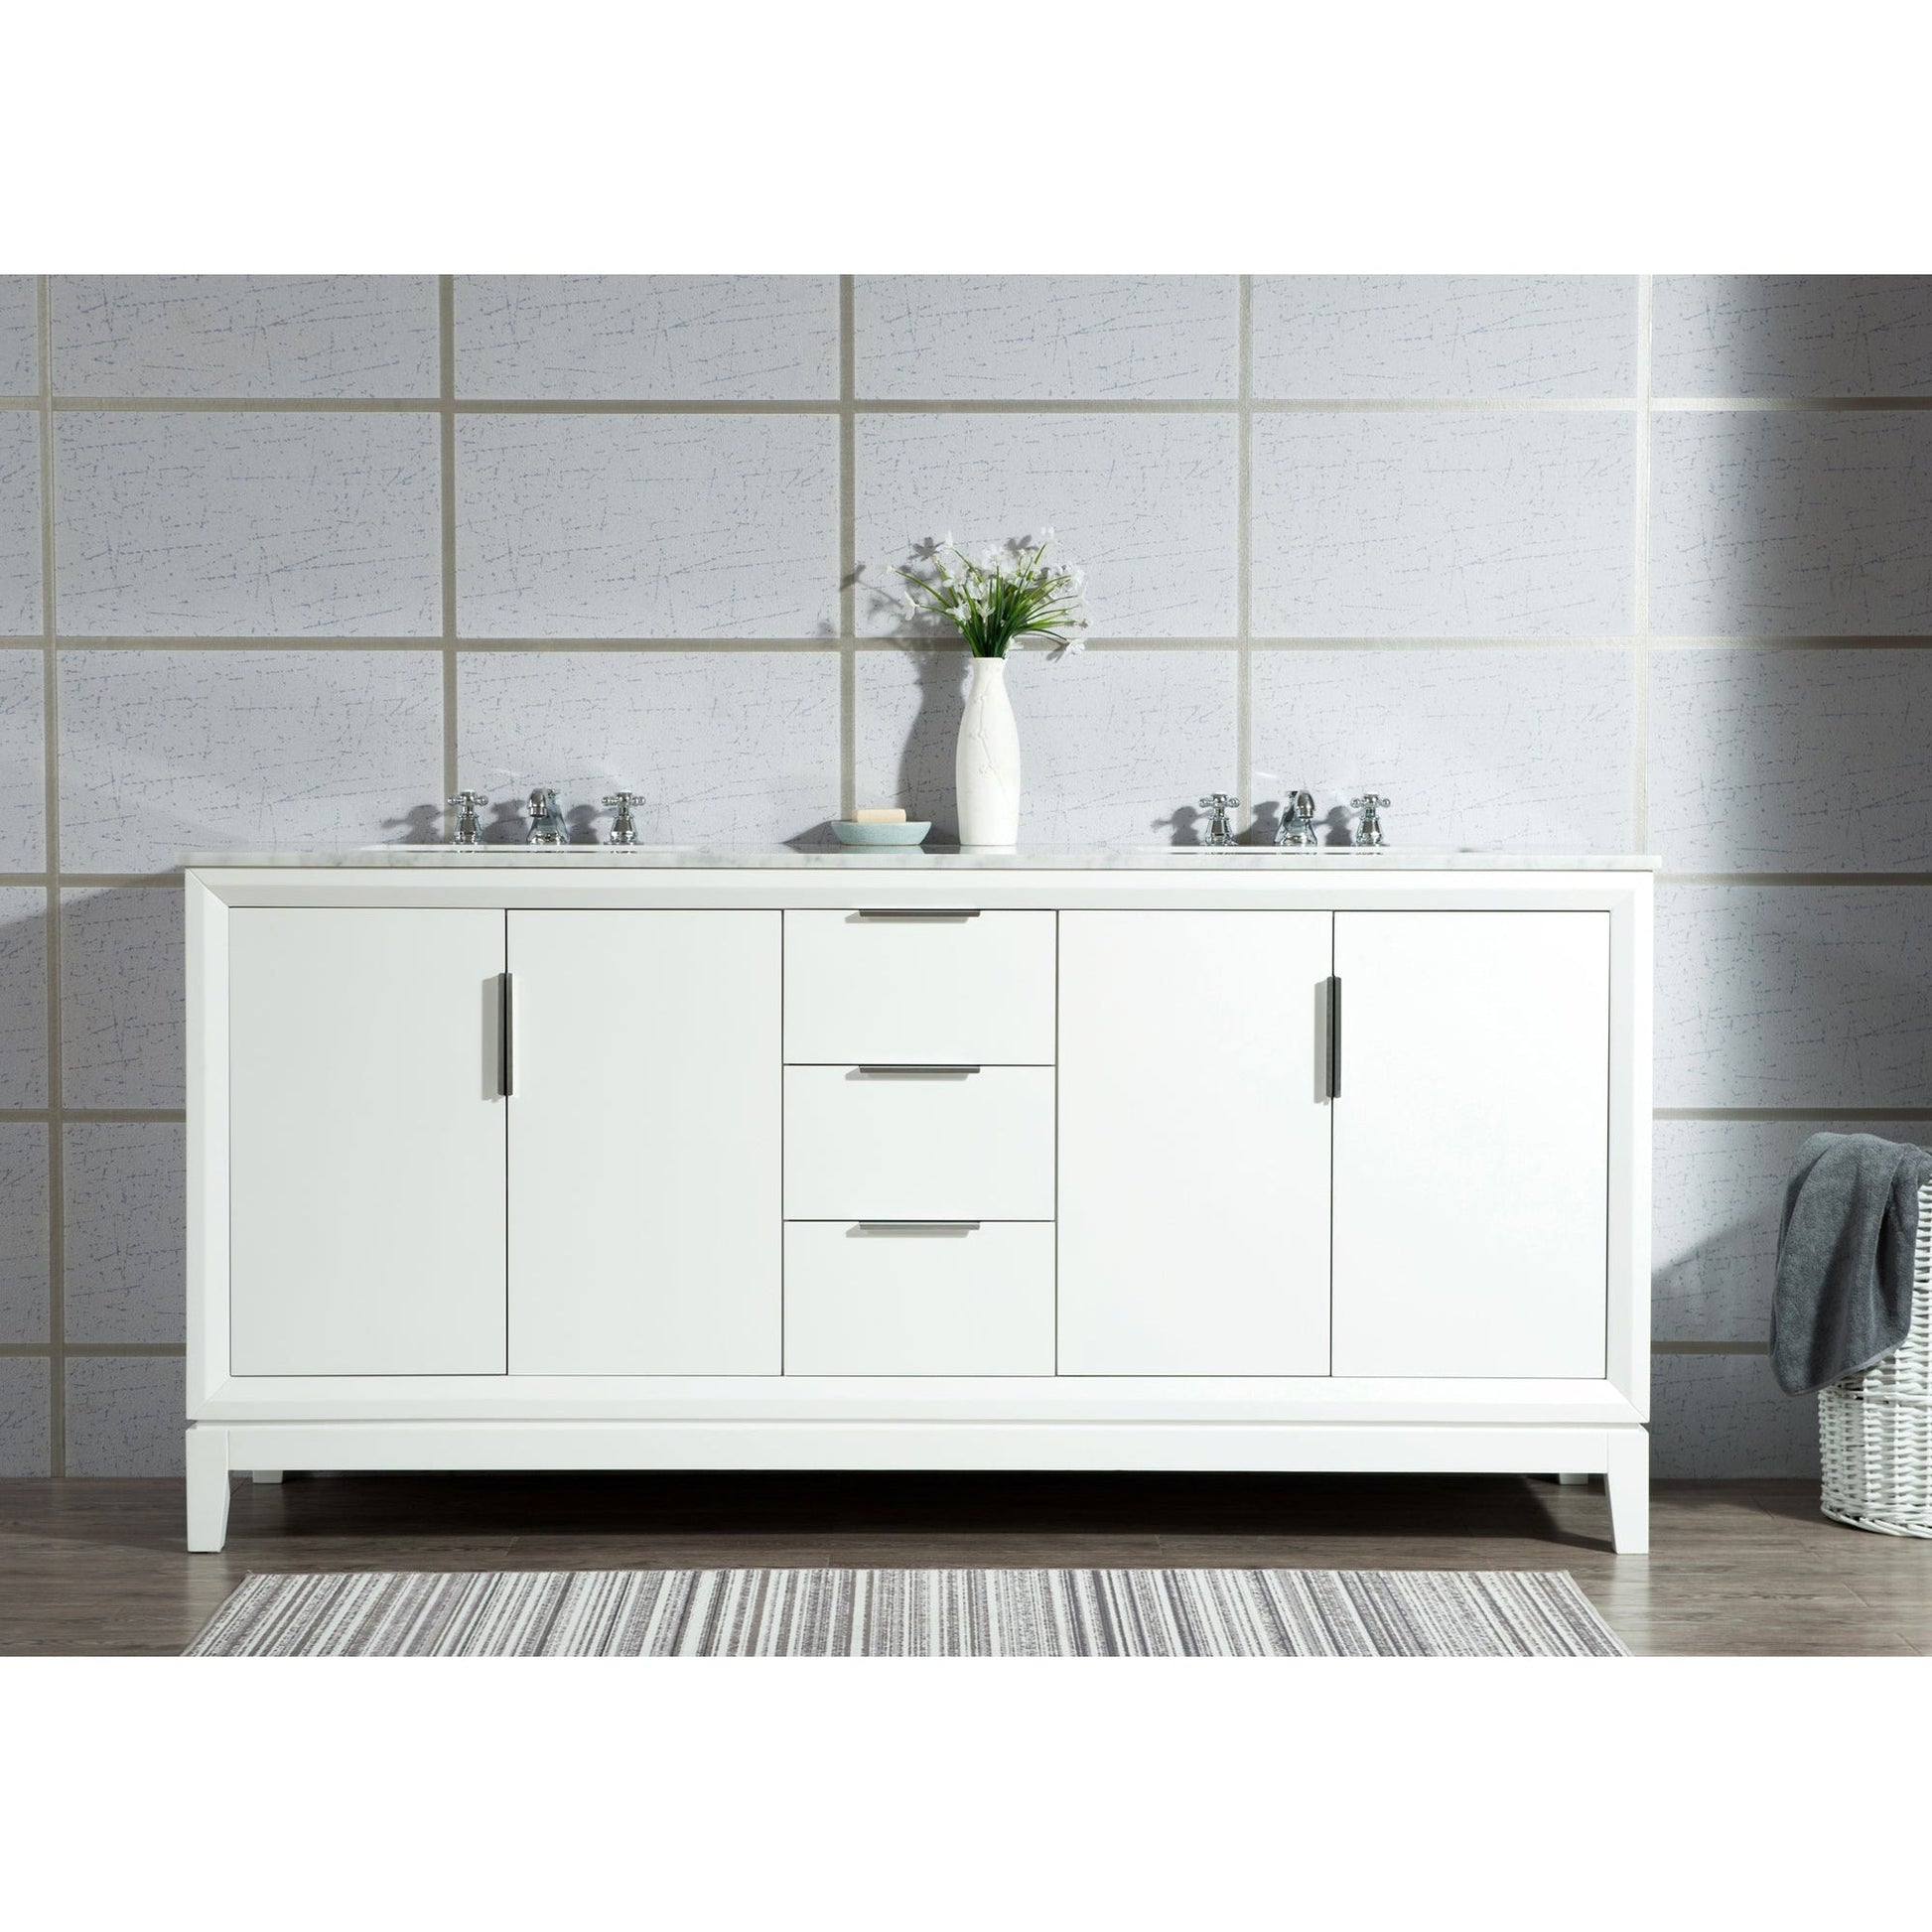 Water Creation Elizabeth 72" Double Sink Carrara White Marble Vanity In Pure White With F2-0009-01-BX Lavatory Faucet